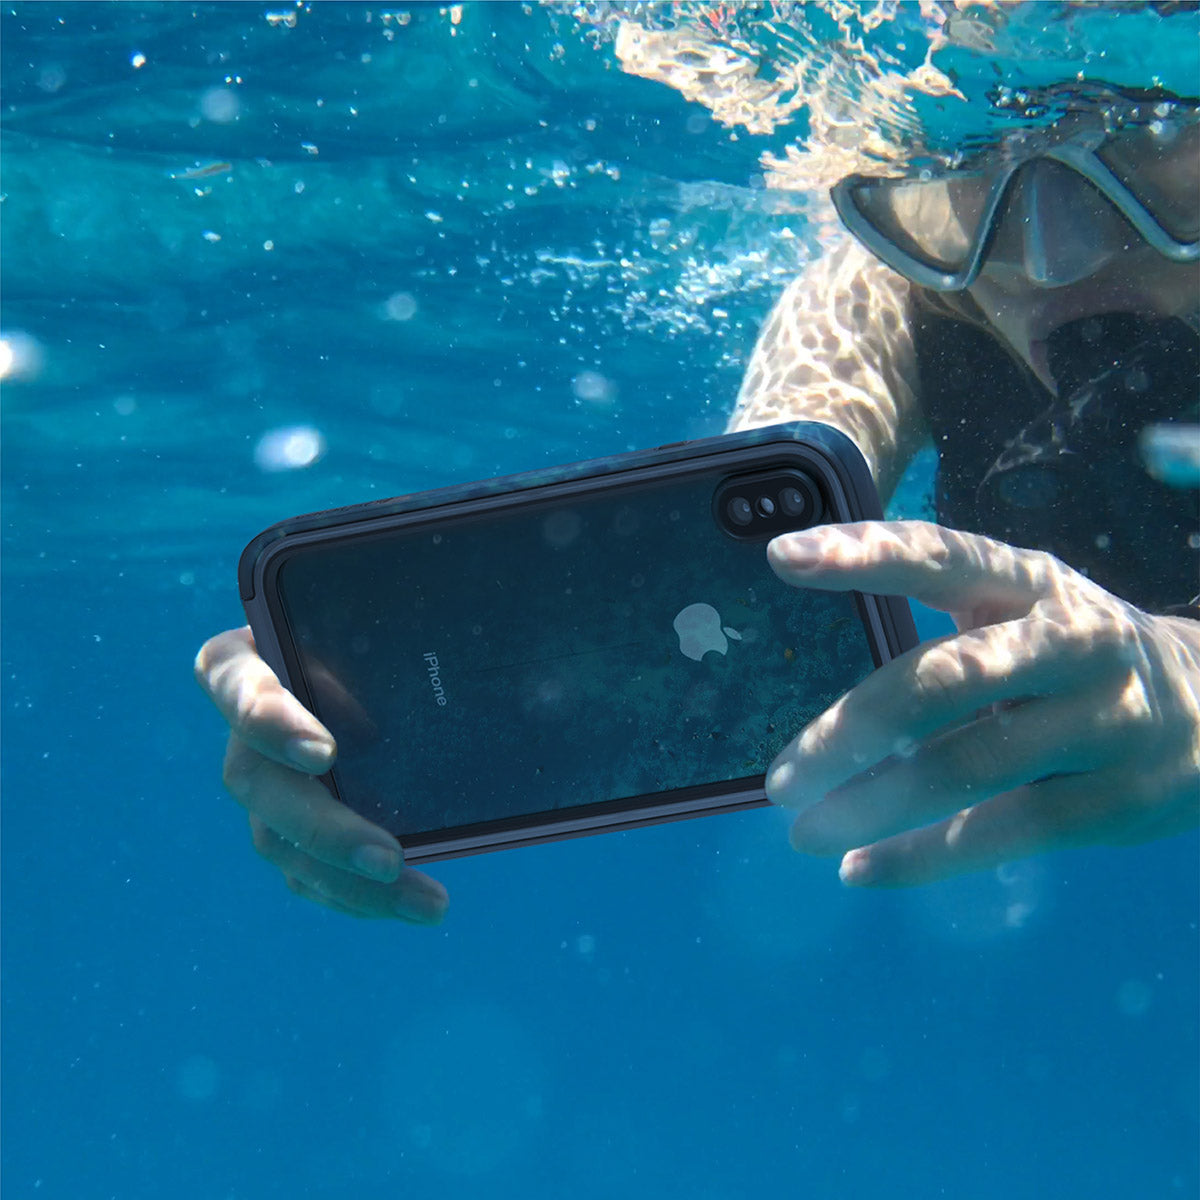 Catalyst iphone x/xr/xs/xs max waterproof case x showing a woman using her phone under water with the case in stealth black